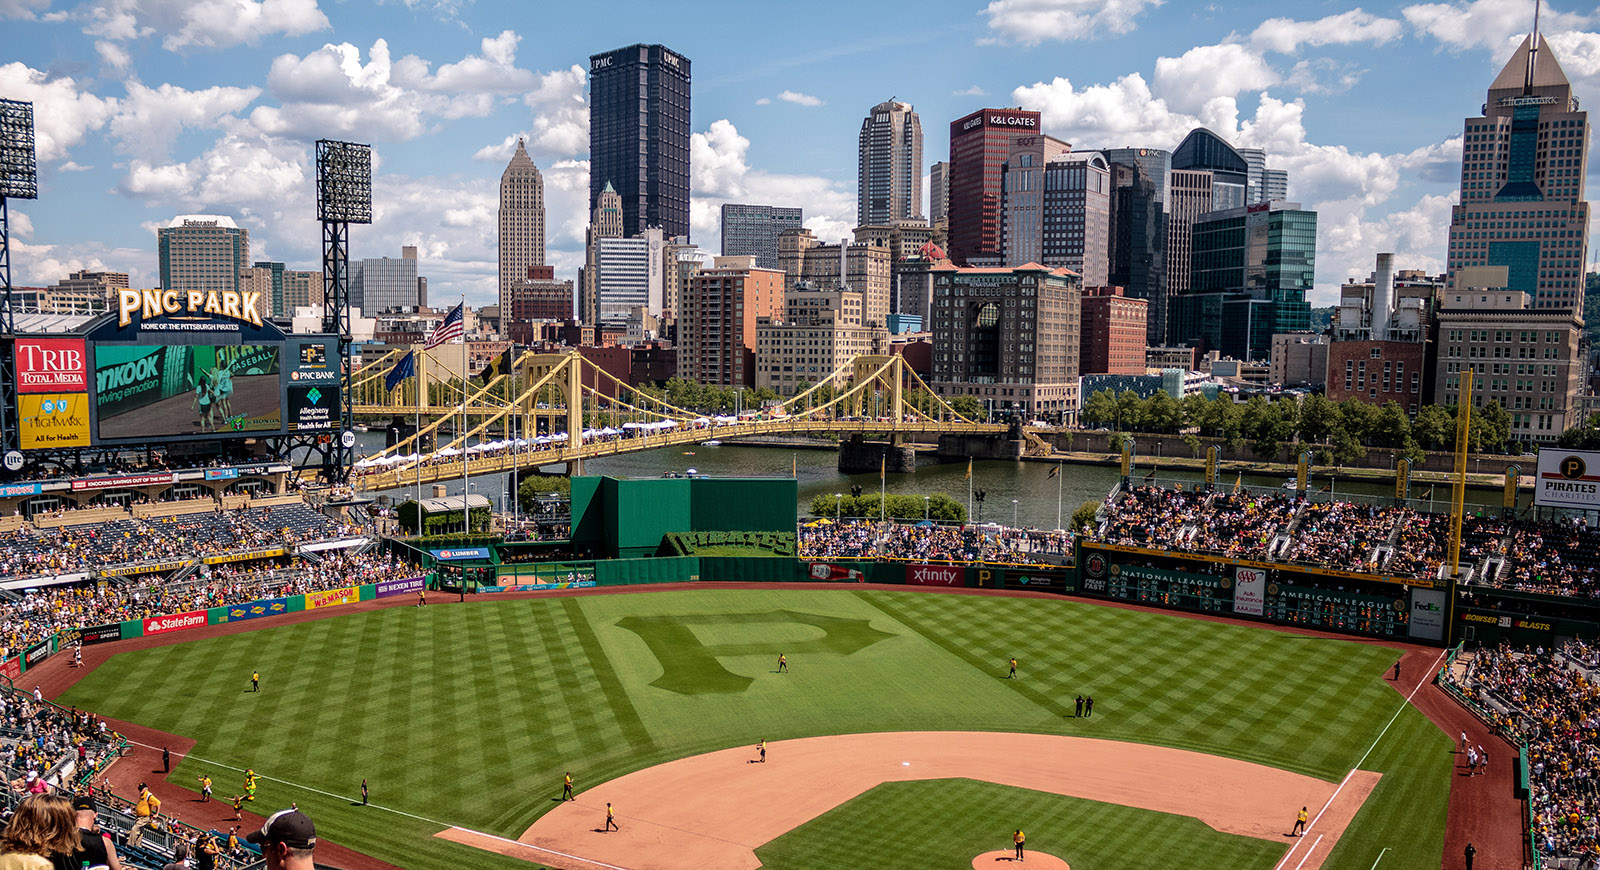 Photo of the Pittsburgh skyline from the baseball stadium PNC Park